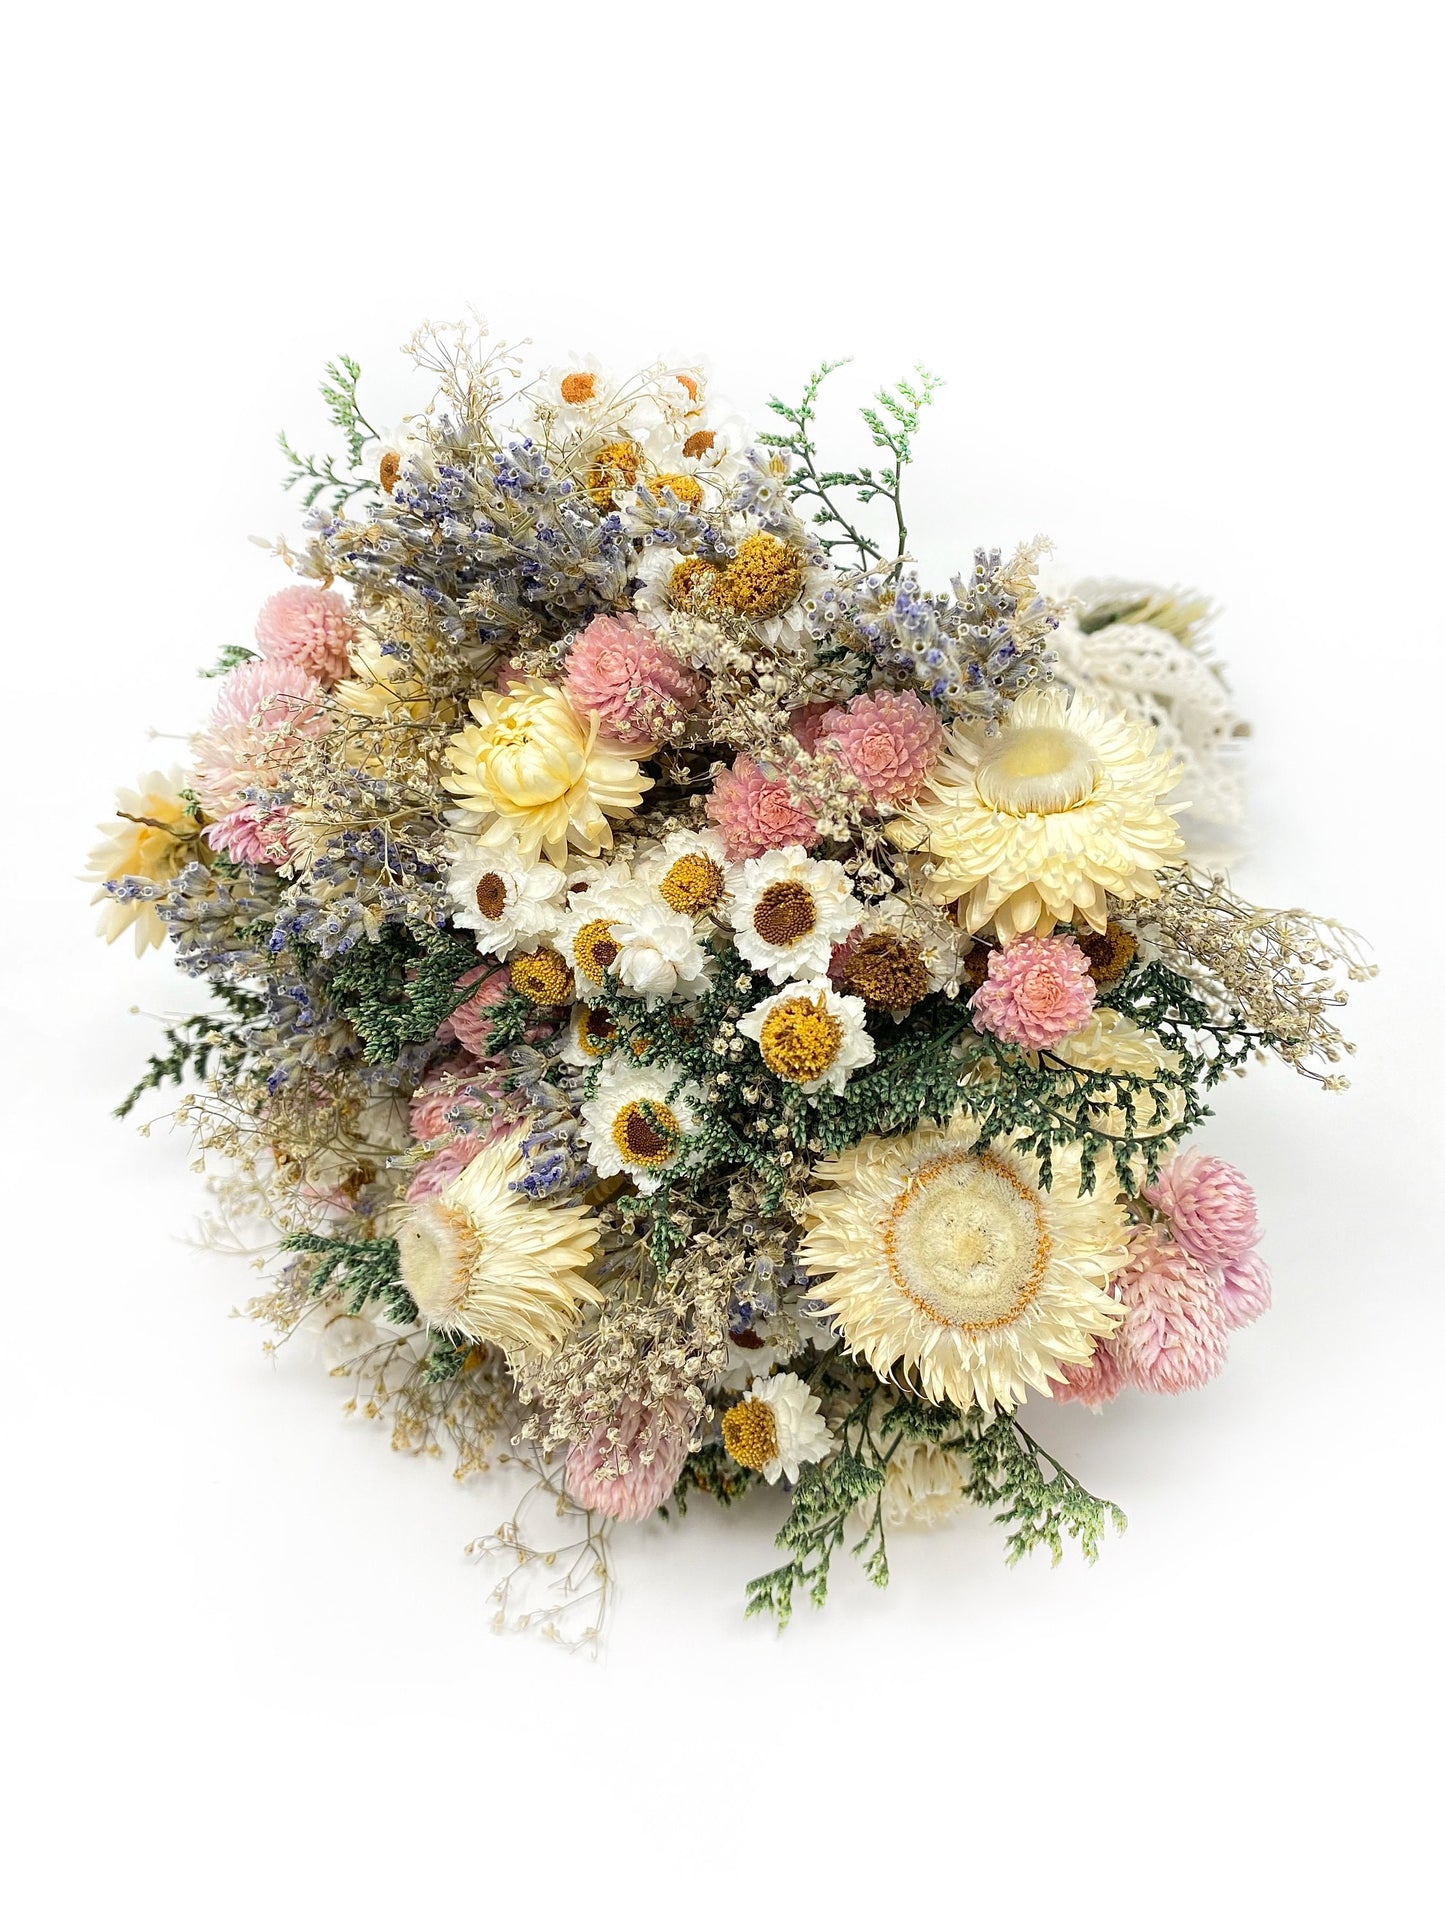 Wedding Bouquet, Dried Flowers, Preserved Floral, Rustic, Ammobium, Bridal, Winter, Throw Bouquet, Spring, Pink and White, Fairy, Lavender